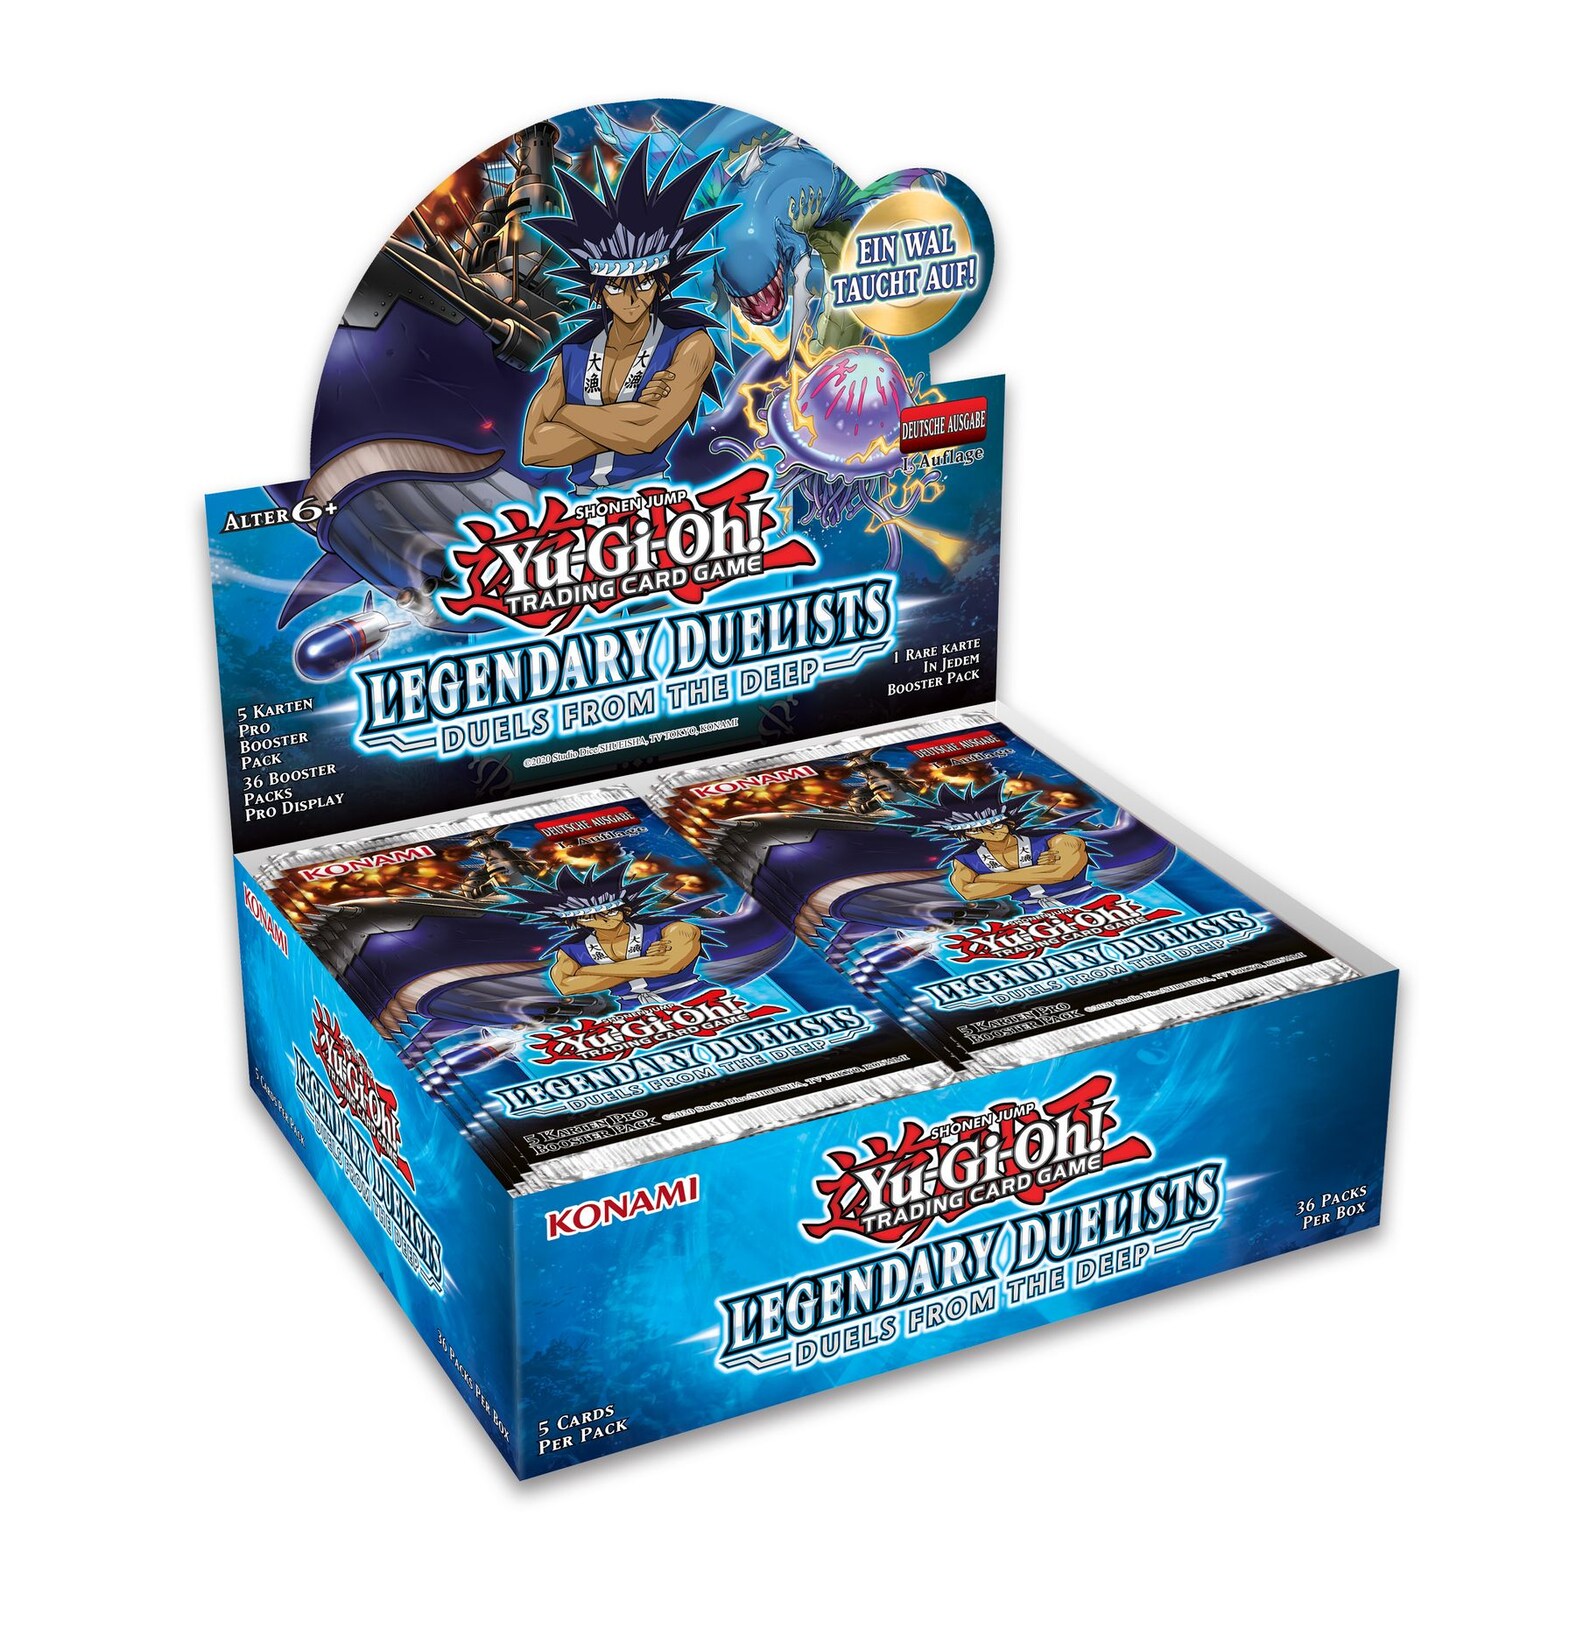 Yu-Gi-Oh! Legendary Duelists Duels from the Deep Display (36 Booster)